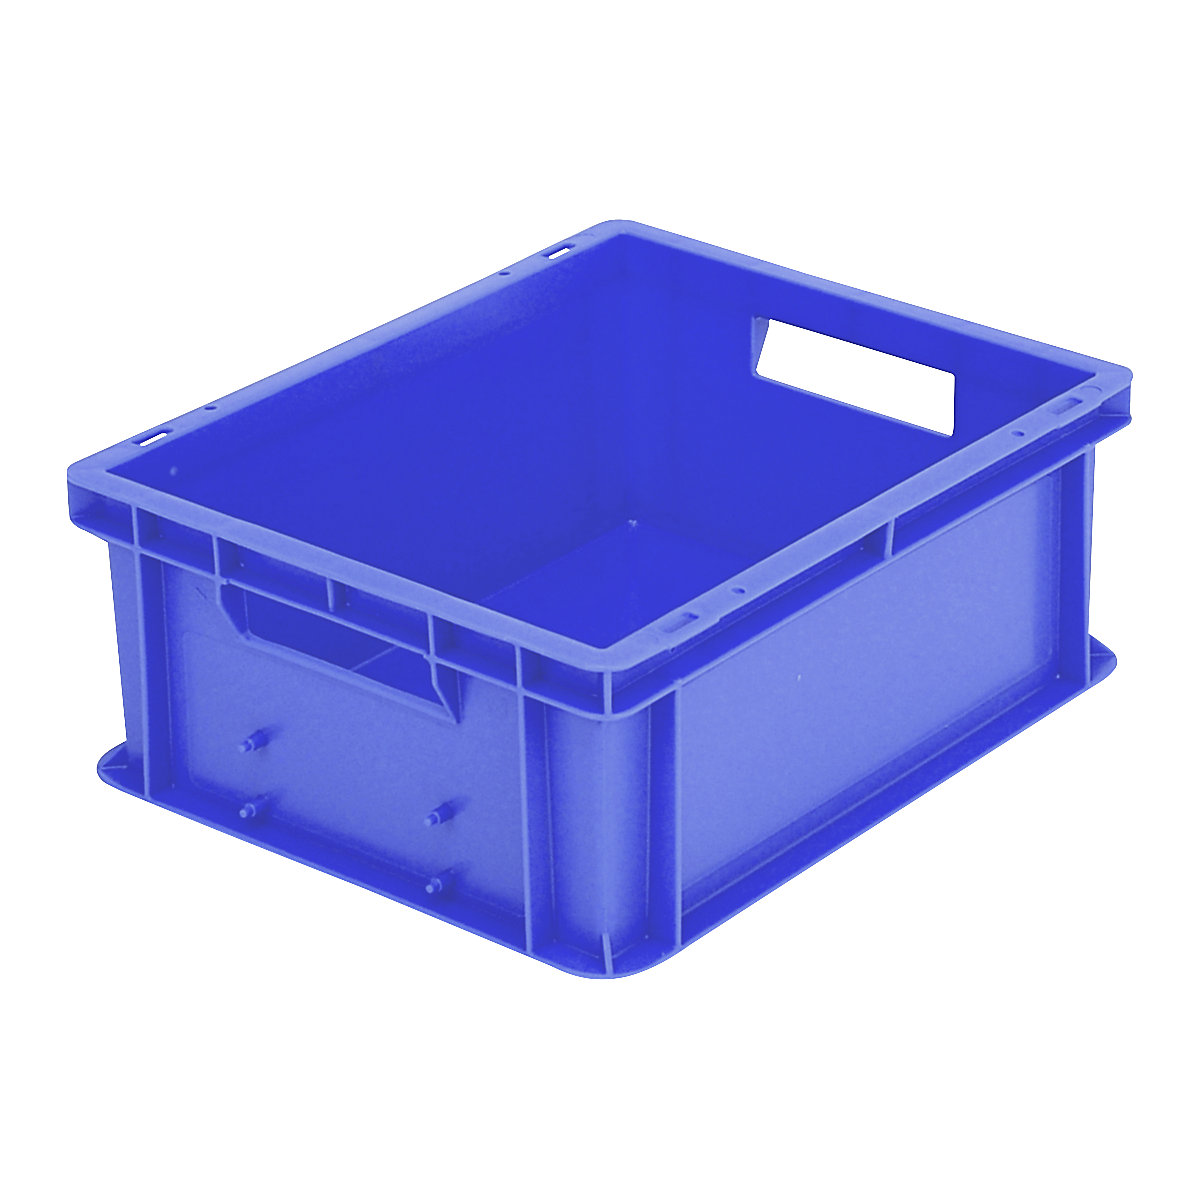 BN Euro stacking container – BITO, solid walls and base, LxWxH 400 x 300 x 153 mm-7